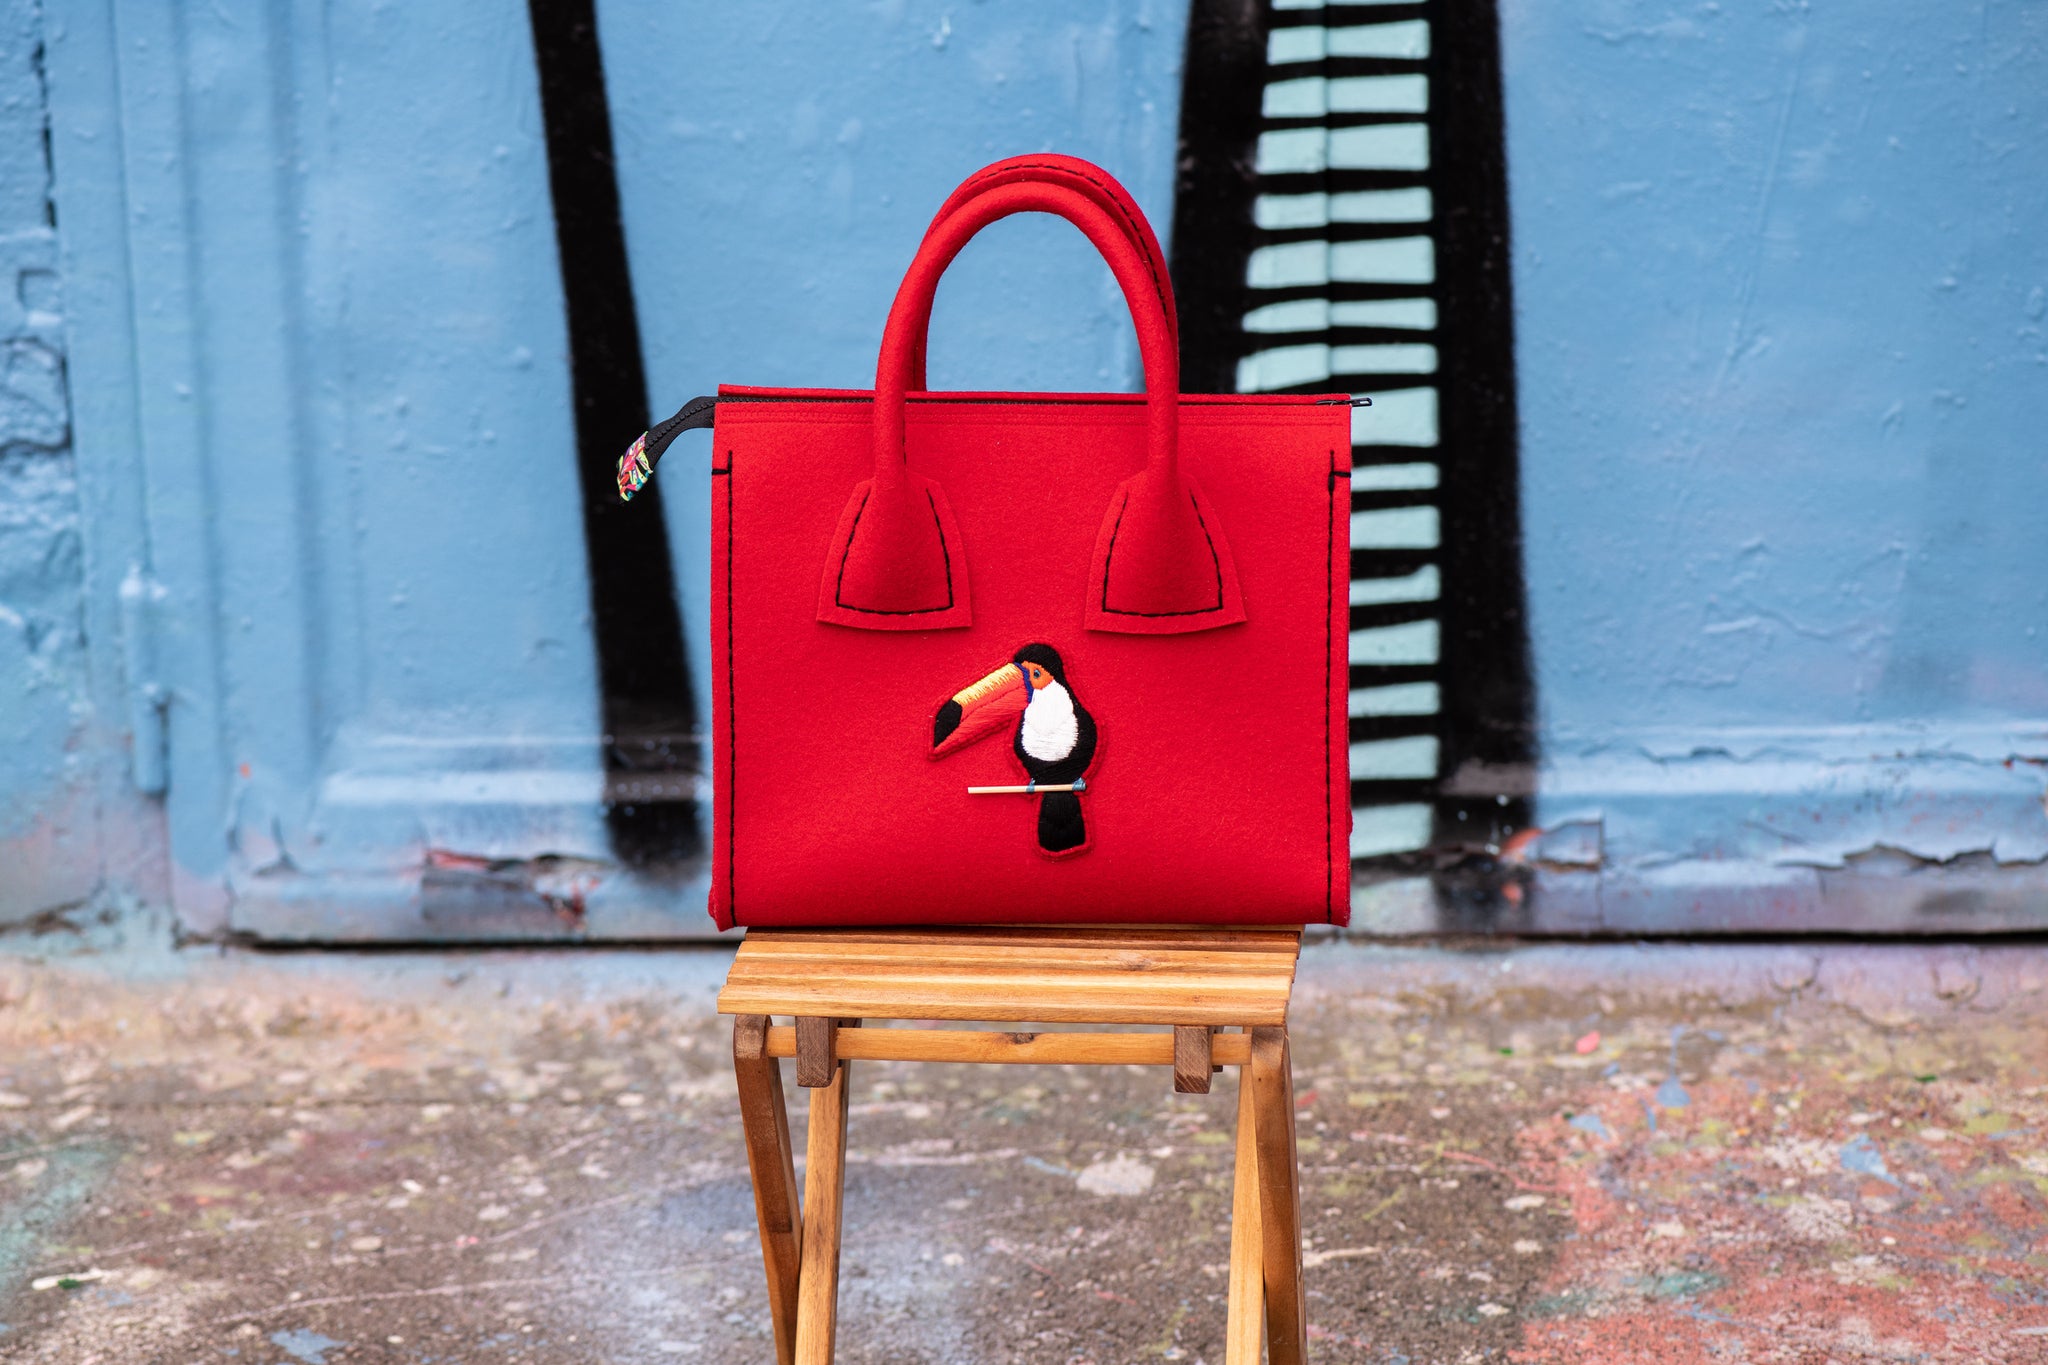 Luxury and hand-embroidered felt handbag, made in Luxembourg.